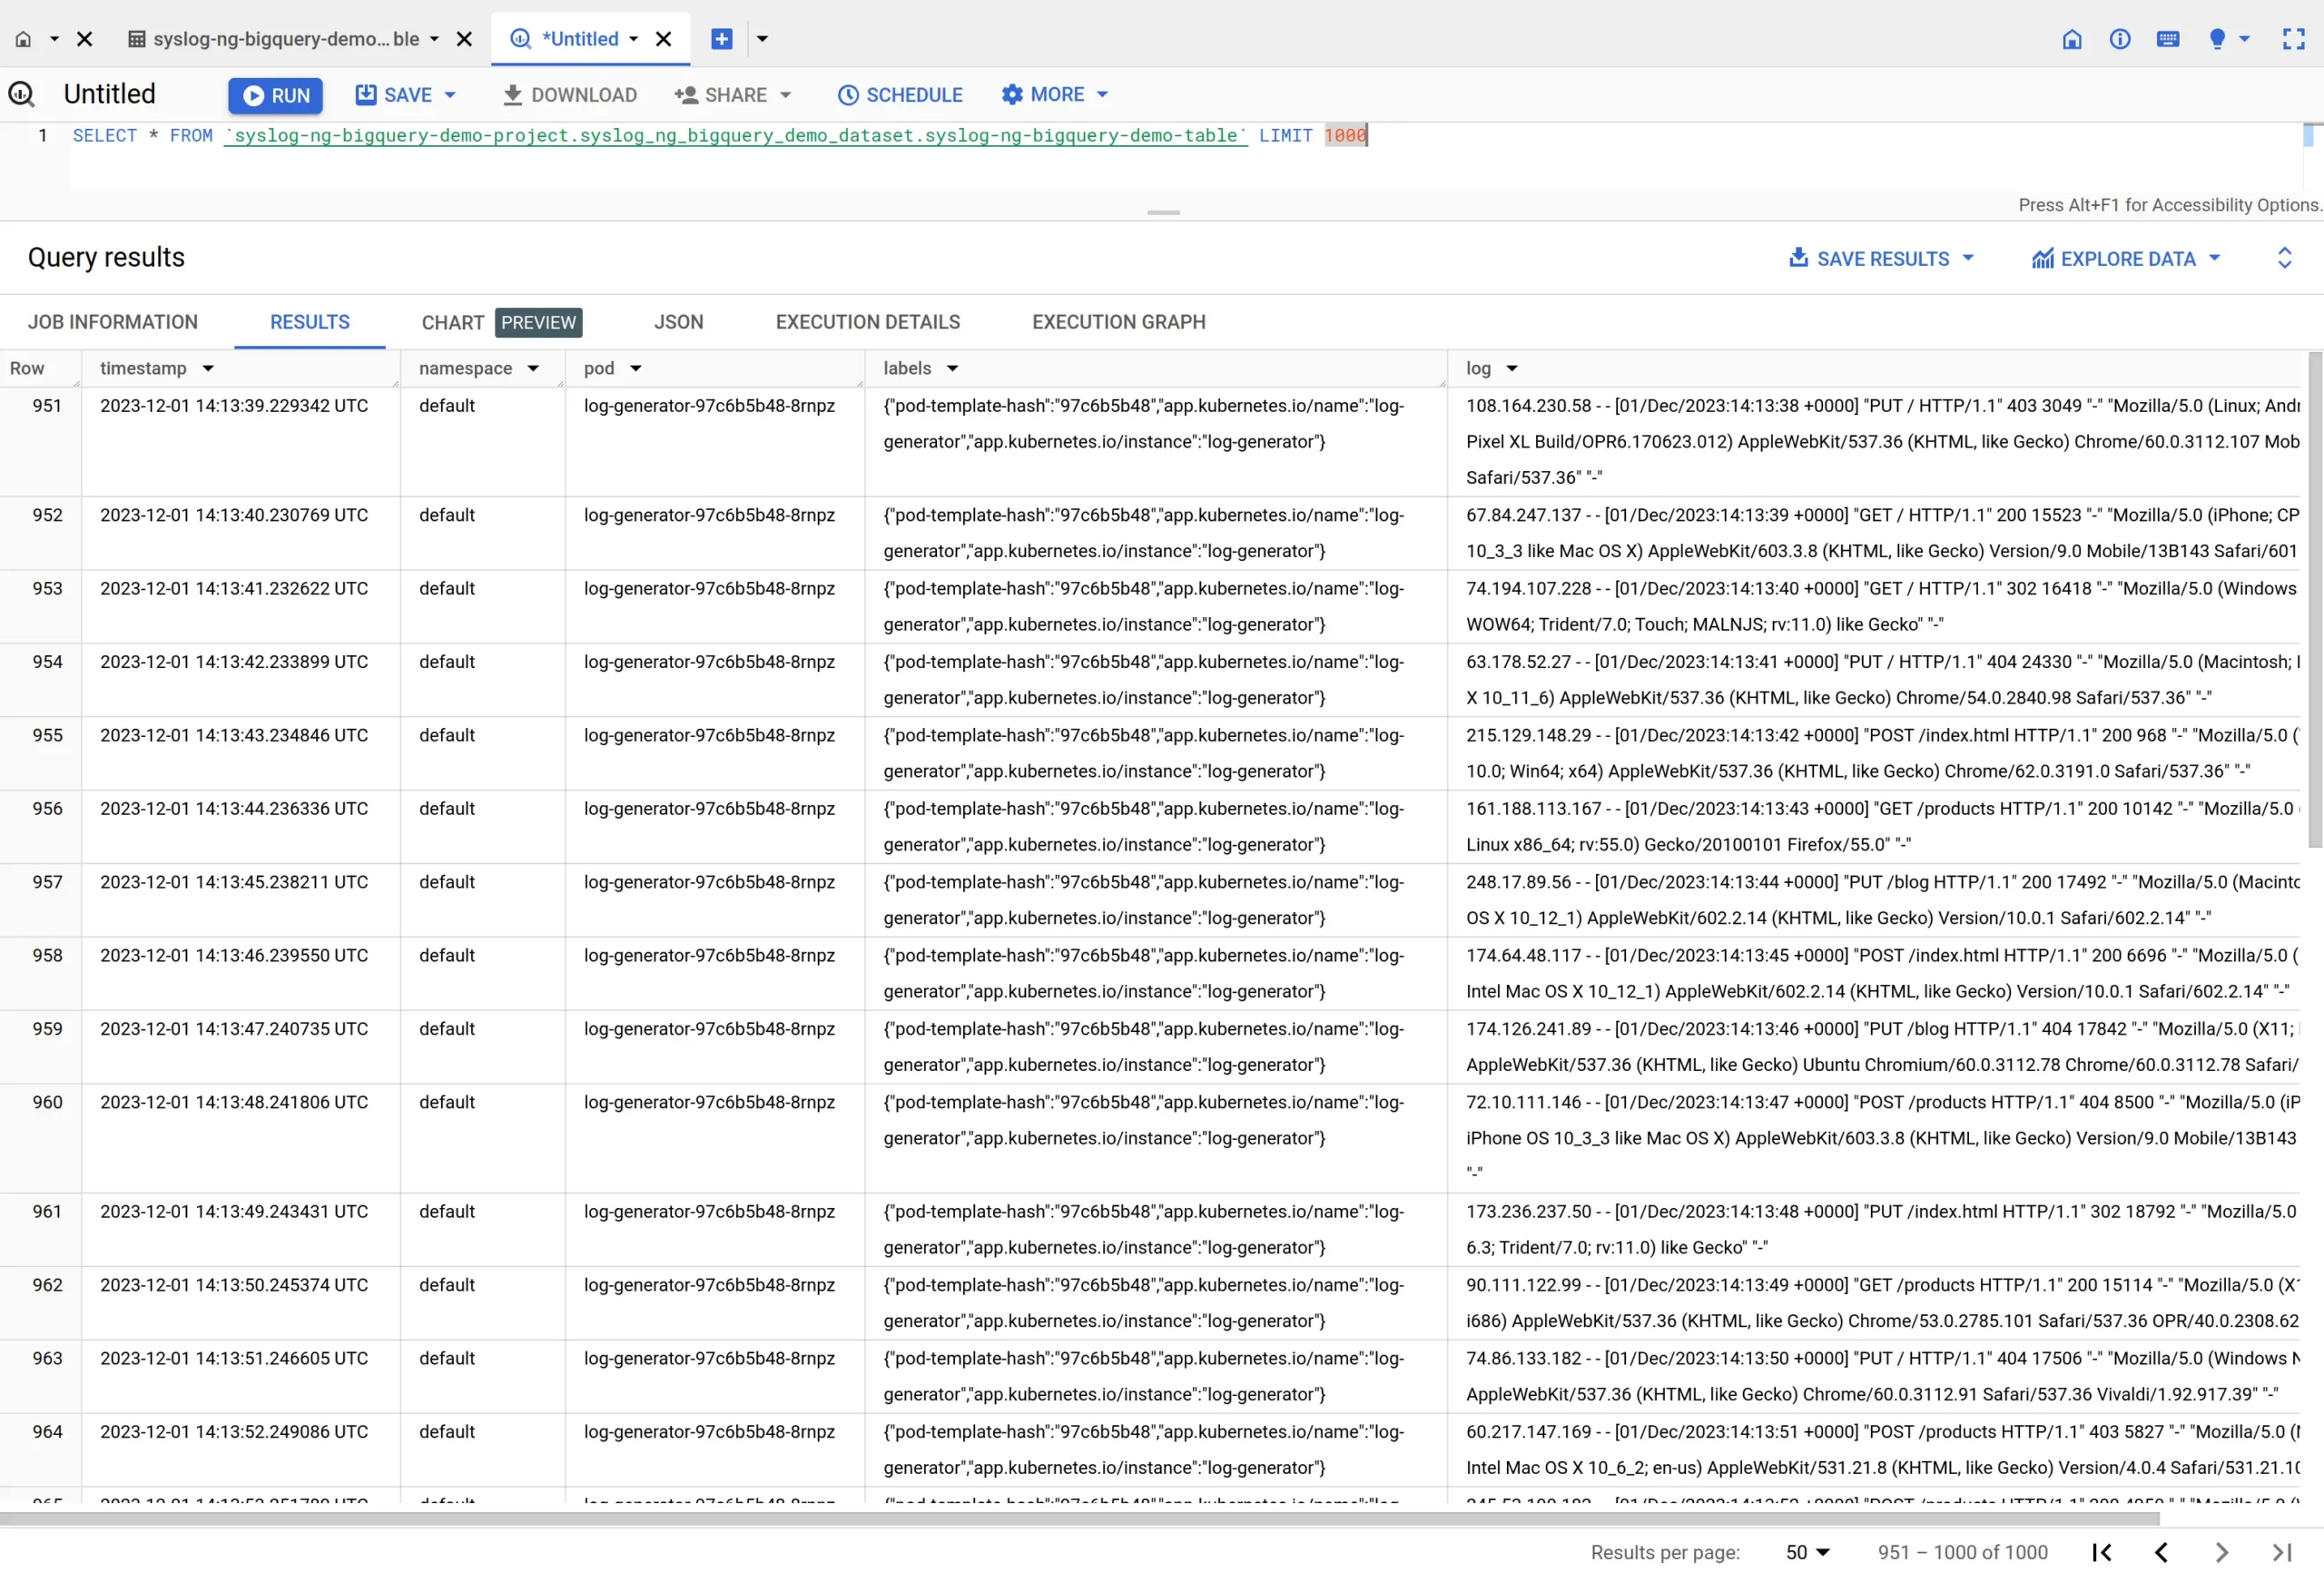 Sample logs sent with syslog-ng to BigQuery